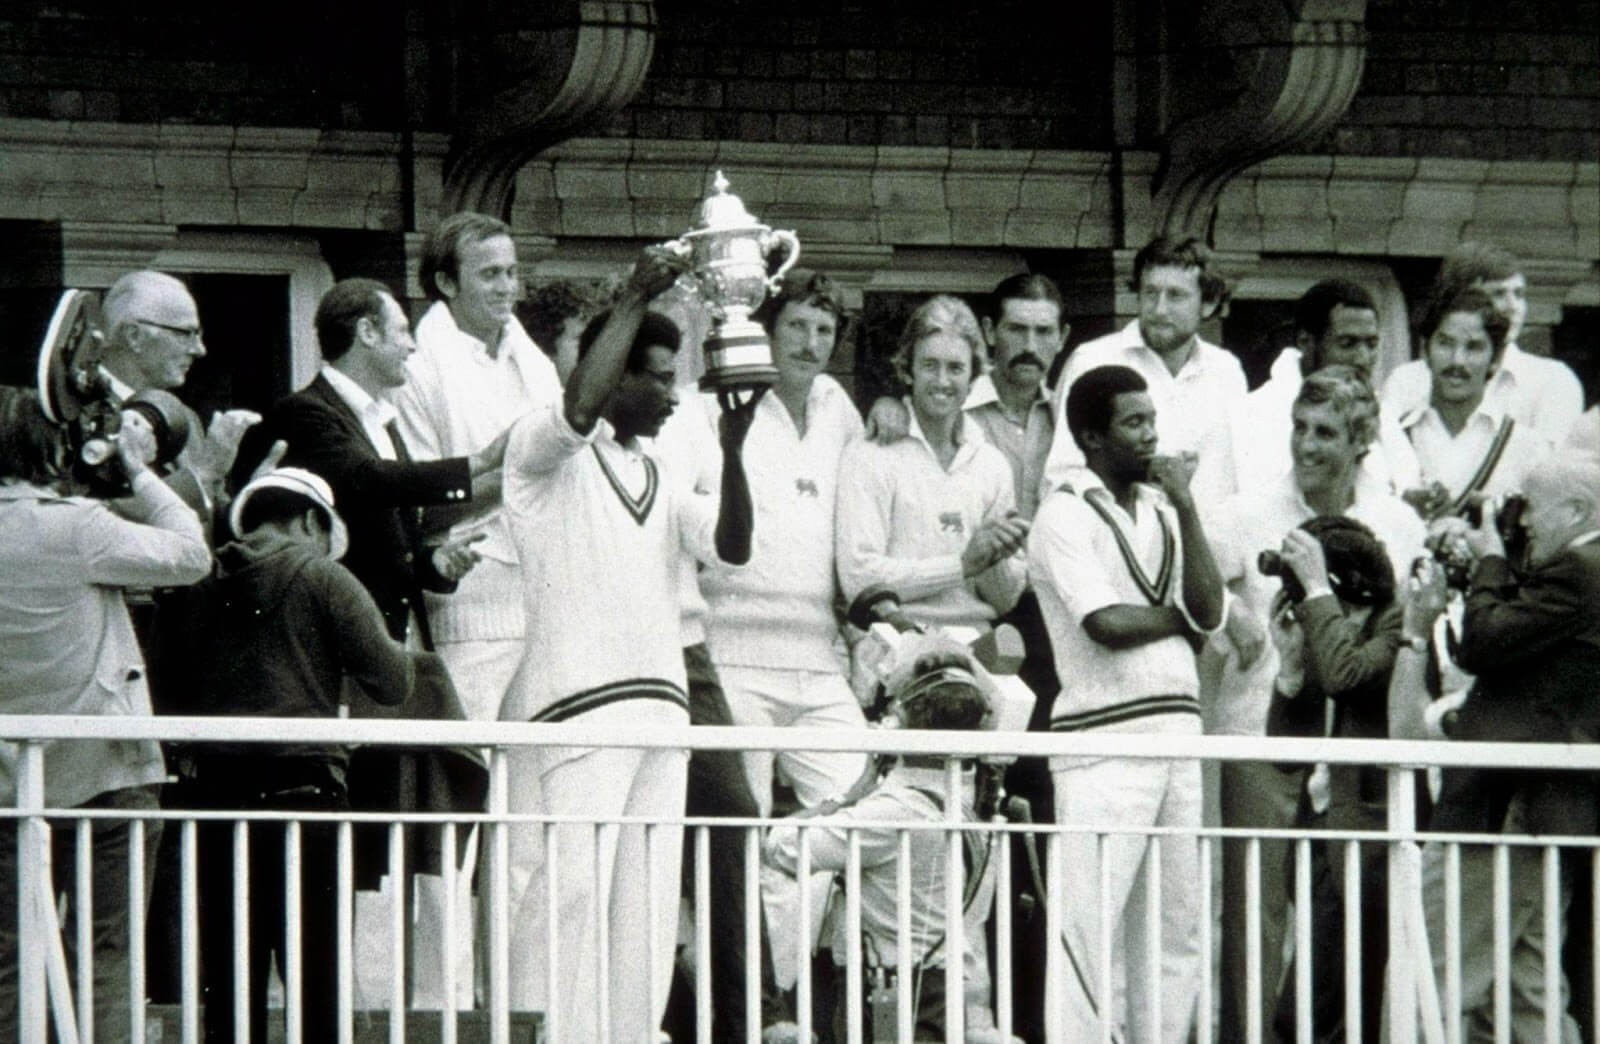 History of Cricket in West Indies